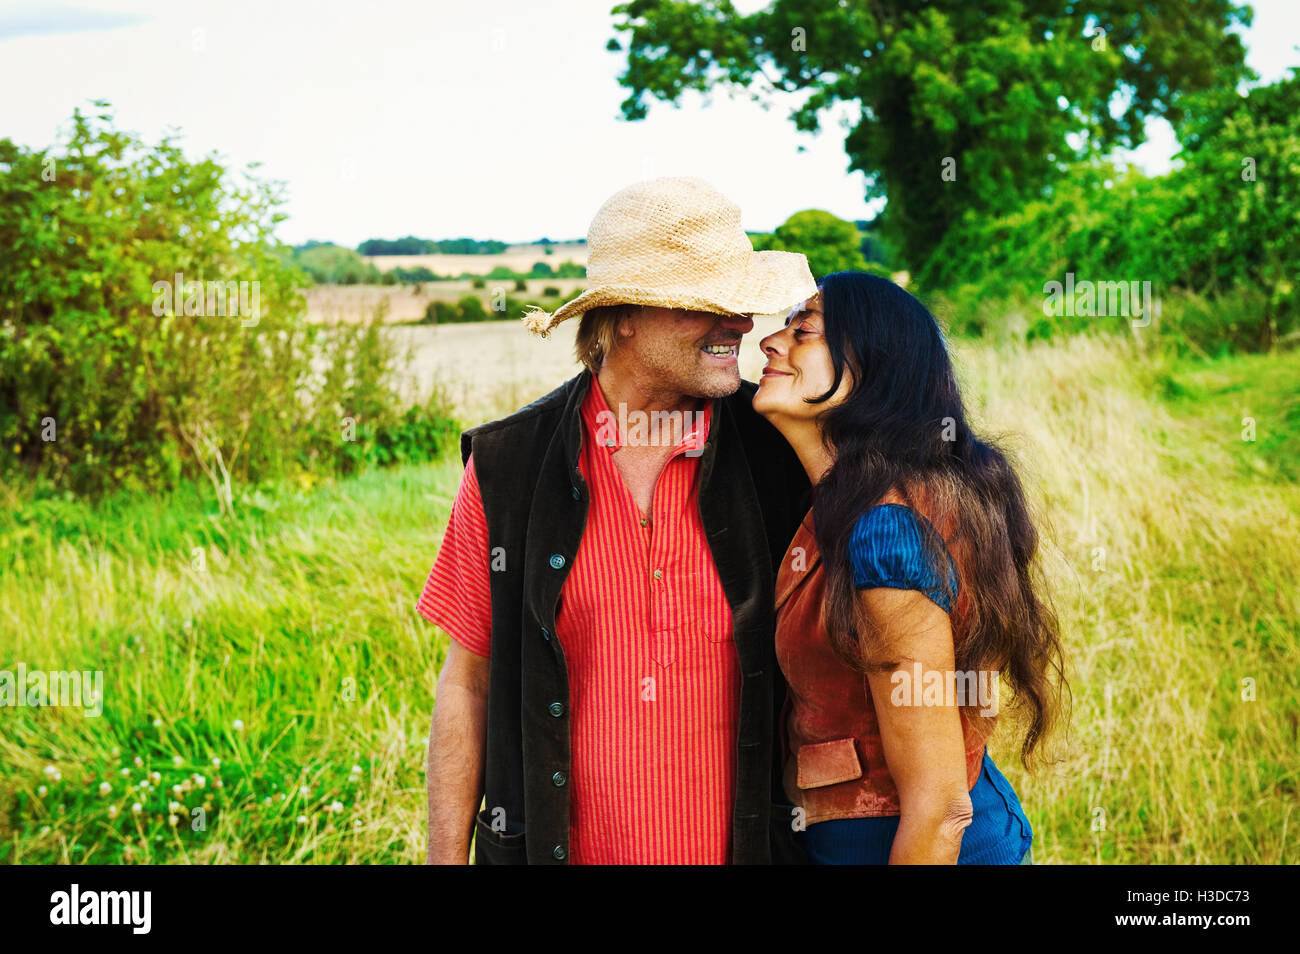 A man and woman kissing and hugging. Stock Photo